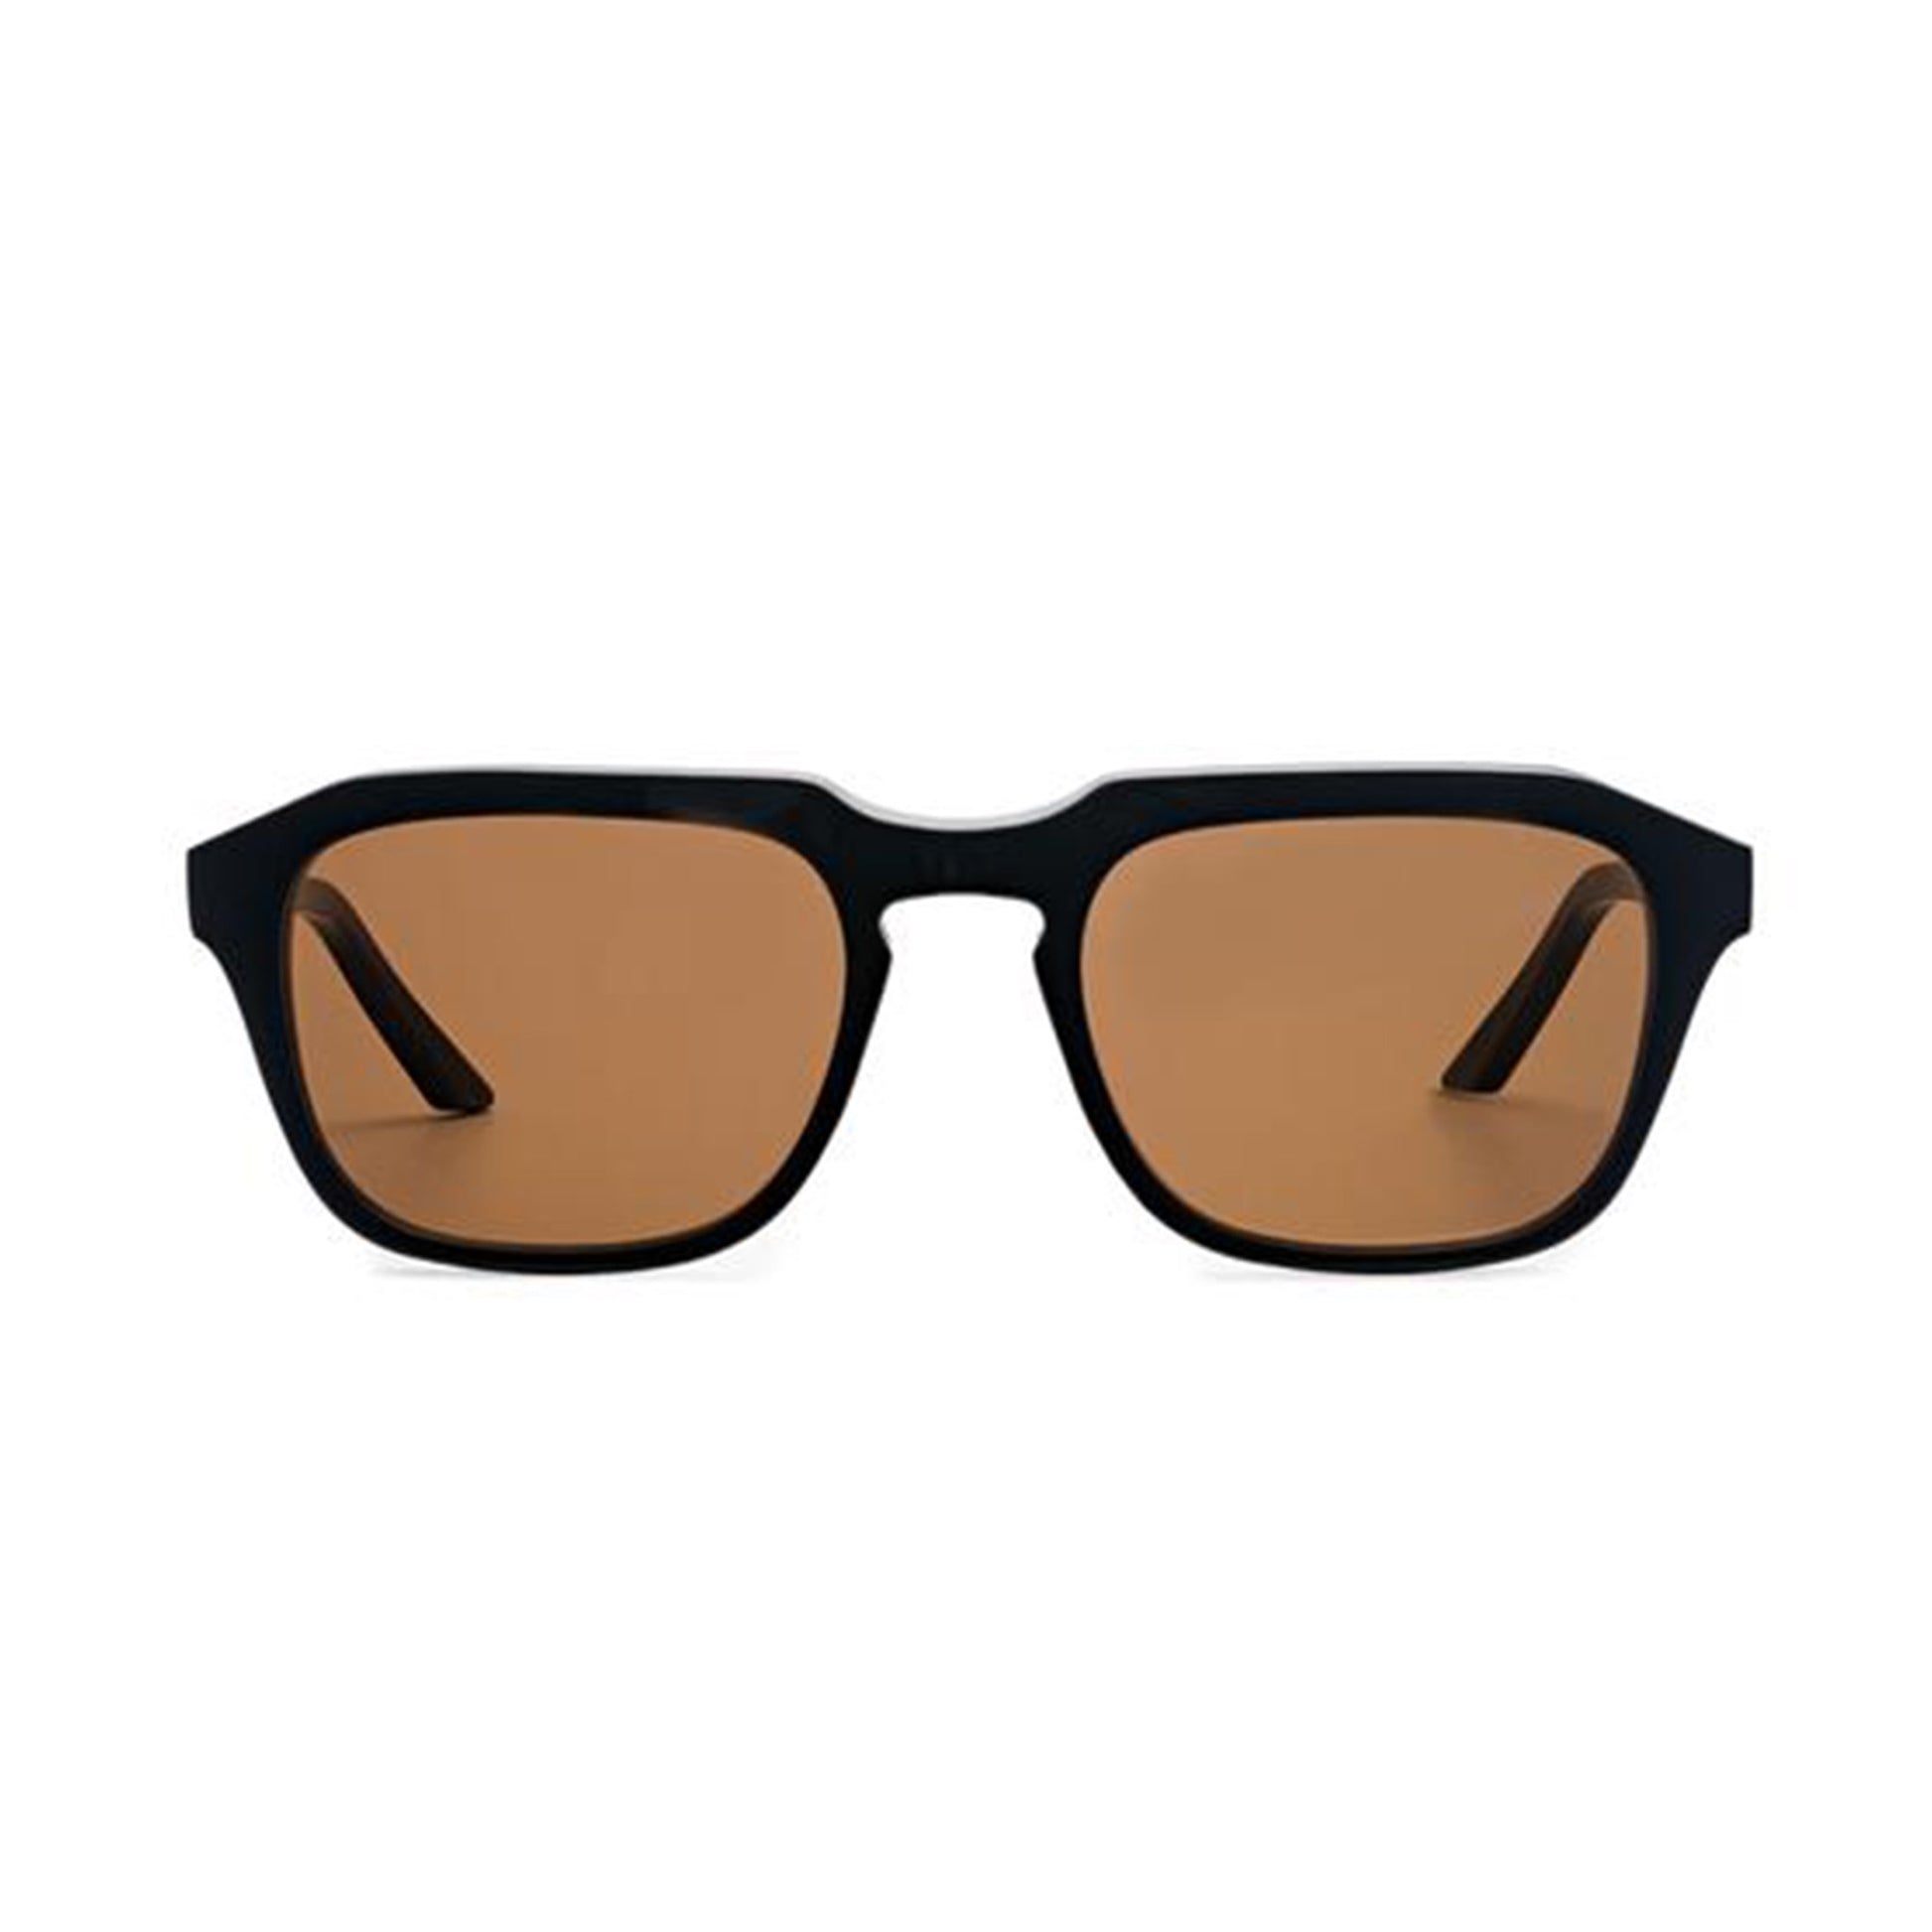 Lowercase NYC Clement Sunglasses Black